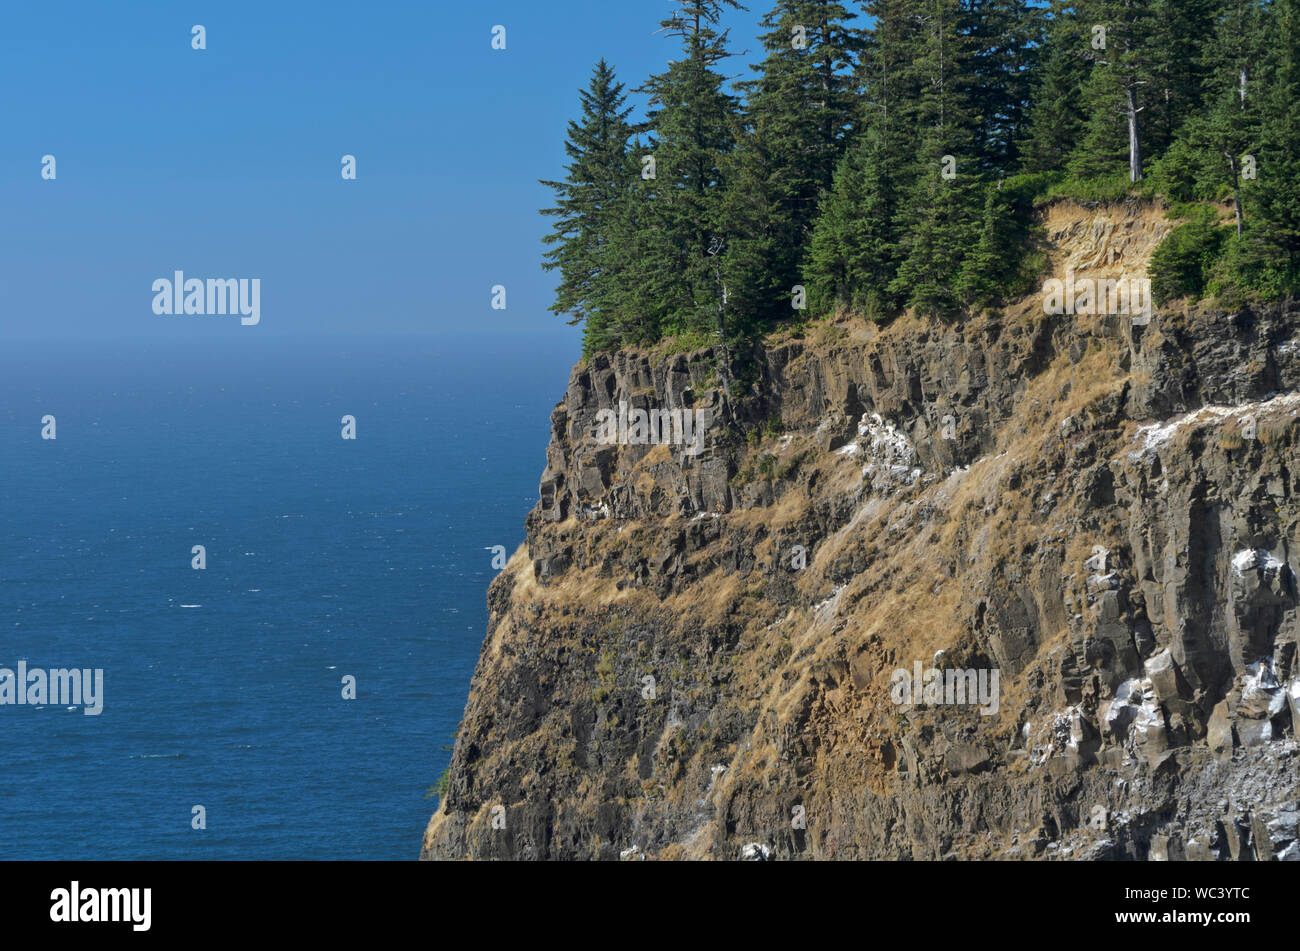 Dramatic cliffs encircle Cape Meares, Oregon, here seen from the Cape Meares Lighthouse. Stock Photo